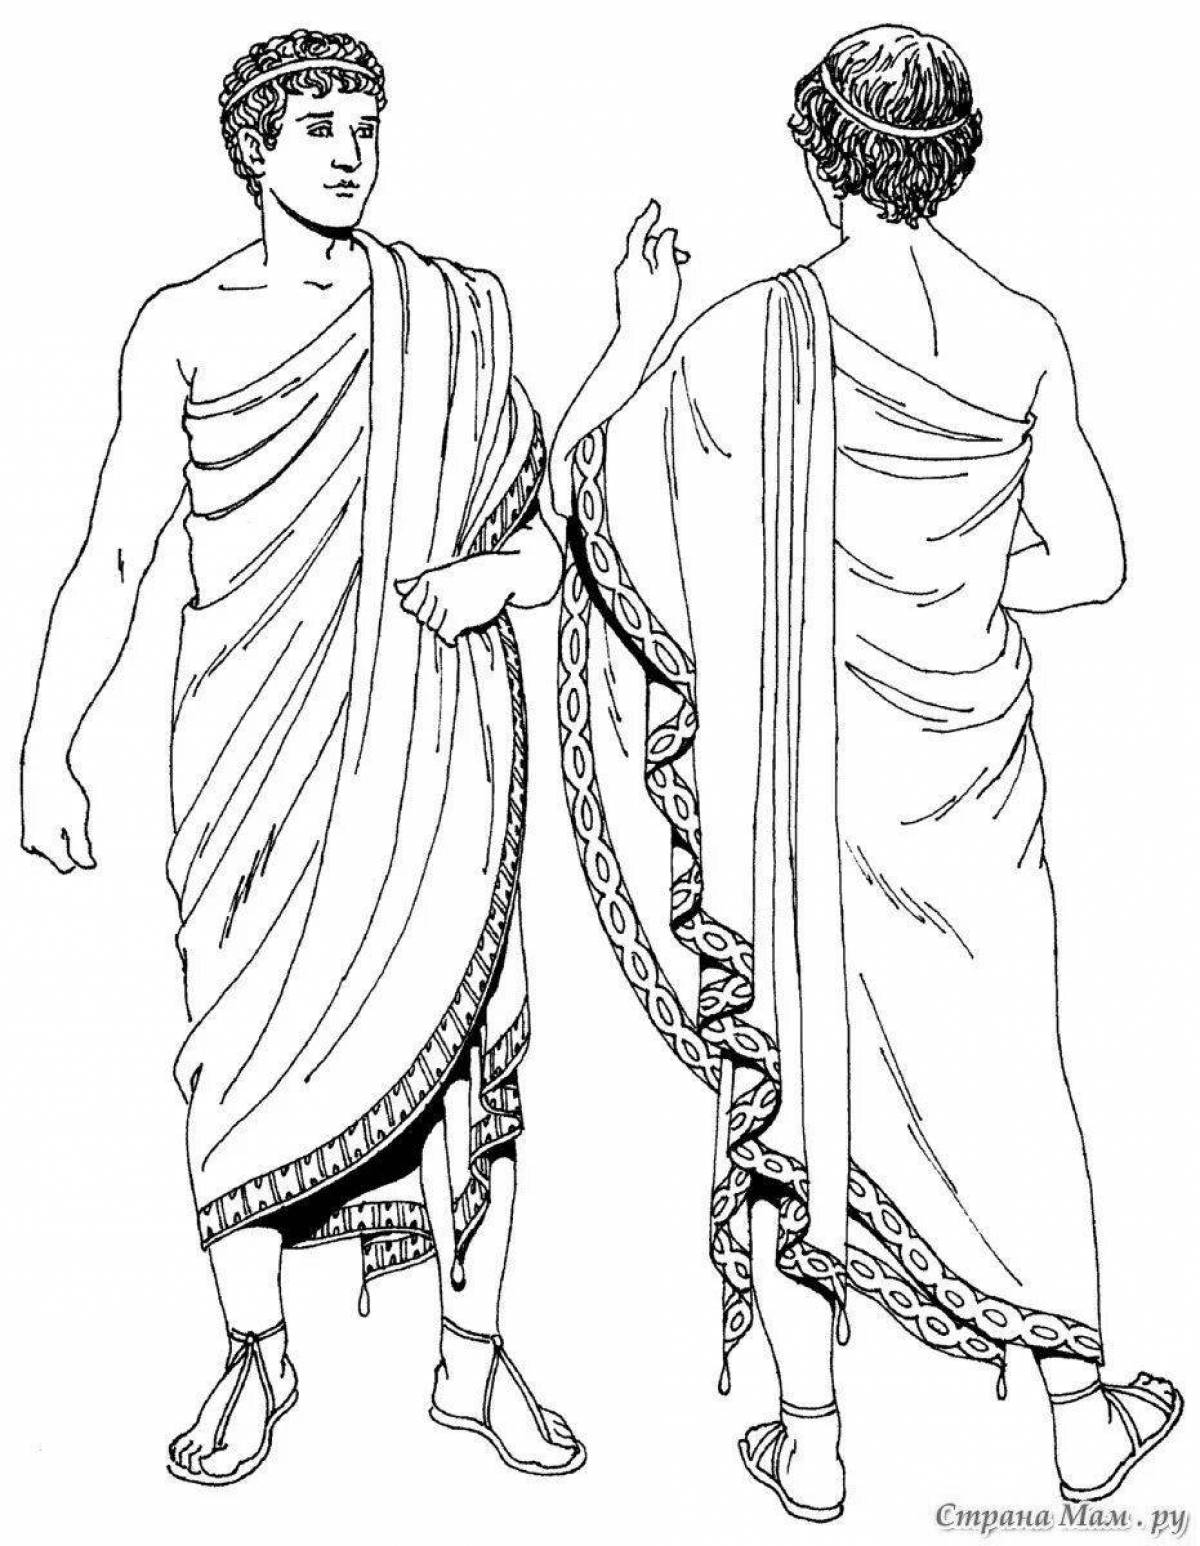 Coloring page of a cheerful Greek costume